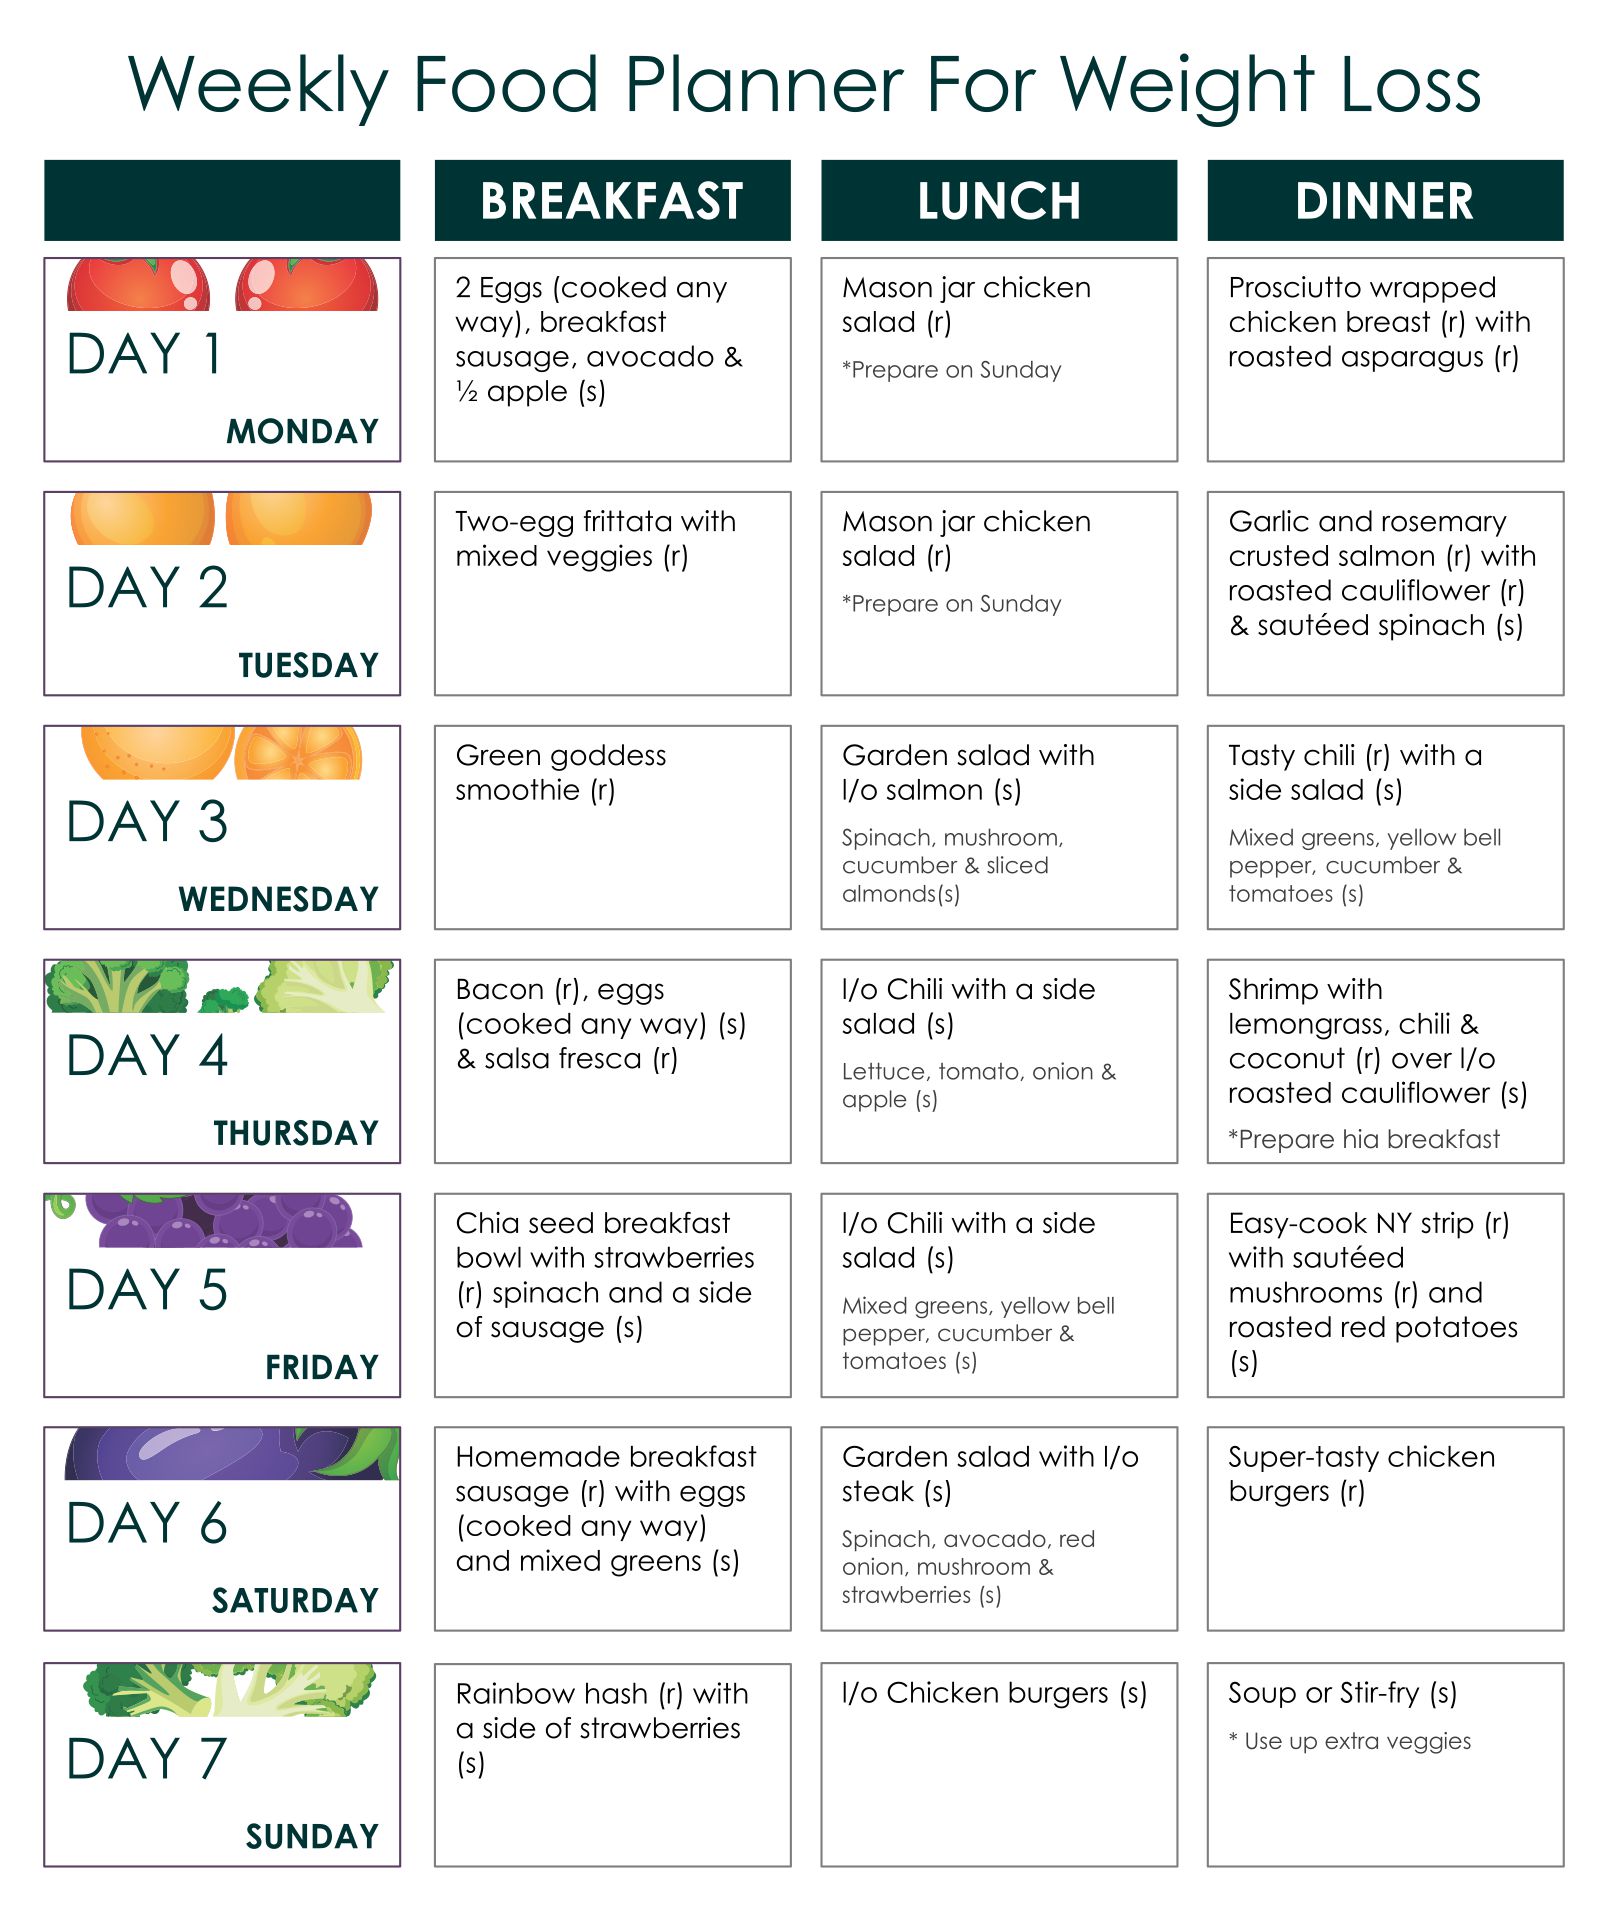 Weekly Food Planner For Weight Loss